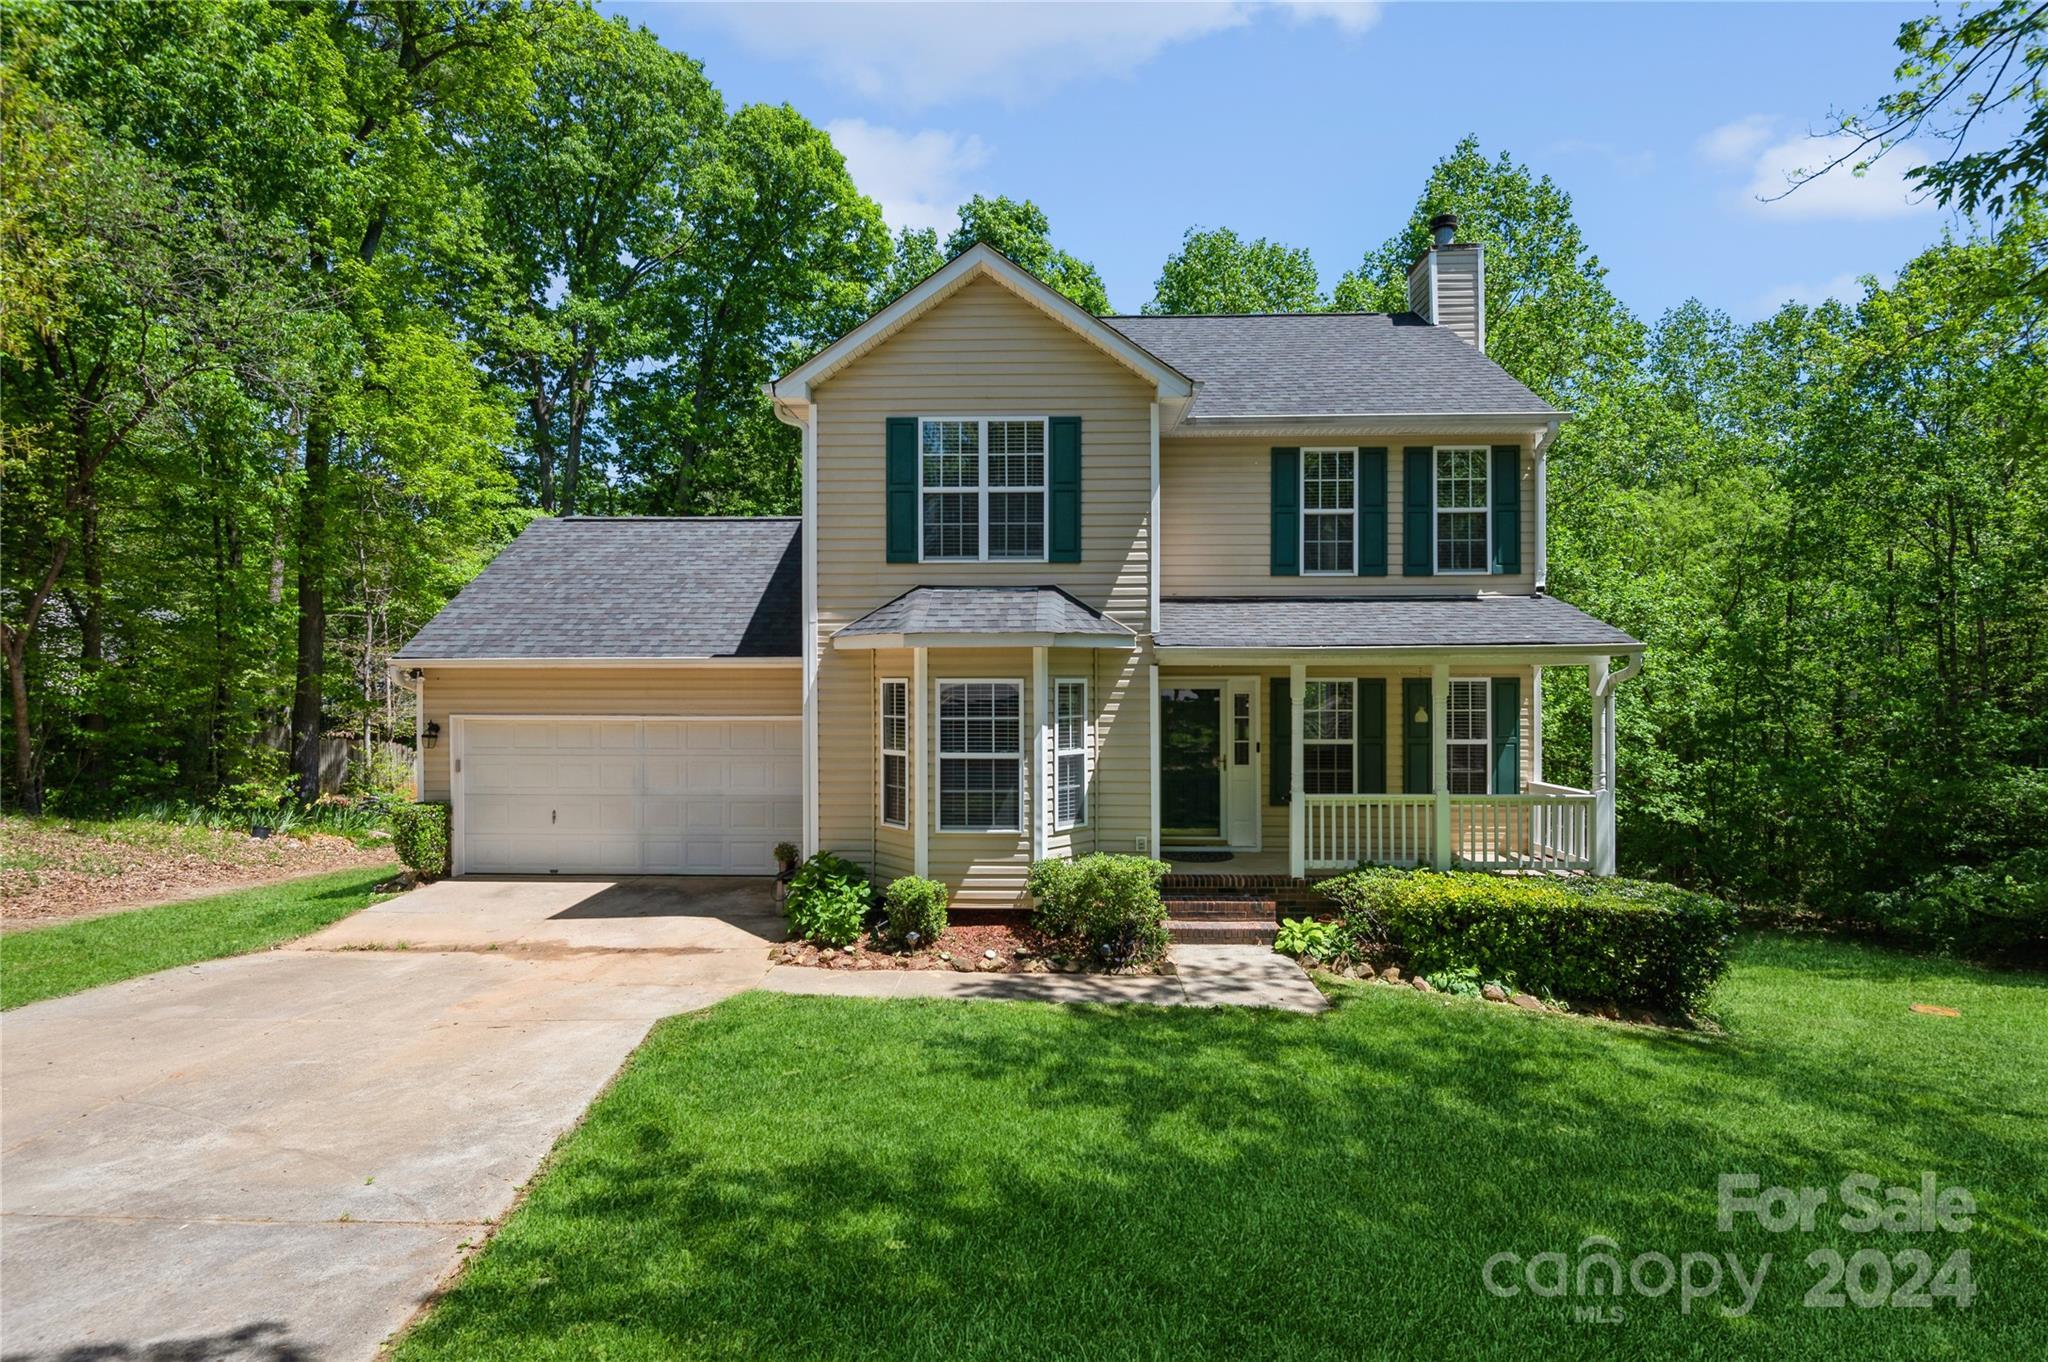 Photo one of 3402 Cranberry Nook Ct Charlotte NC 28269 | MLS 4130936